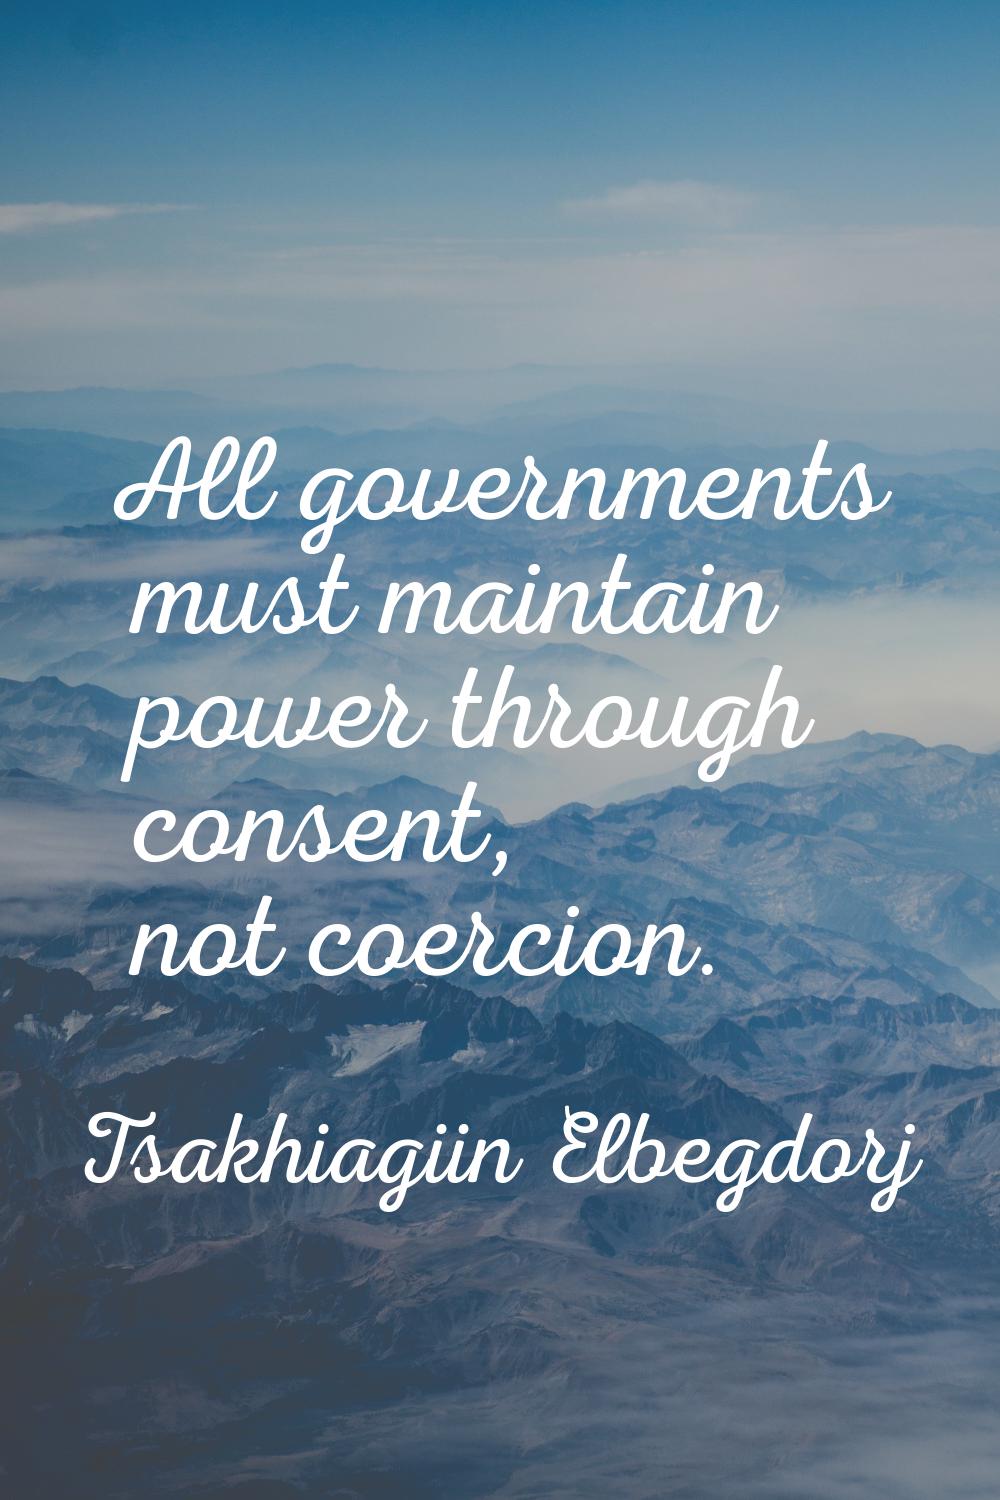 All governments must maintain power through consent, not coercion.